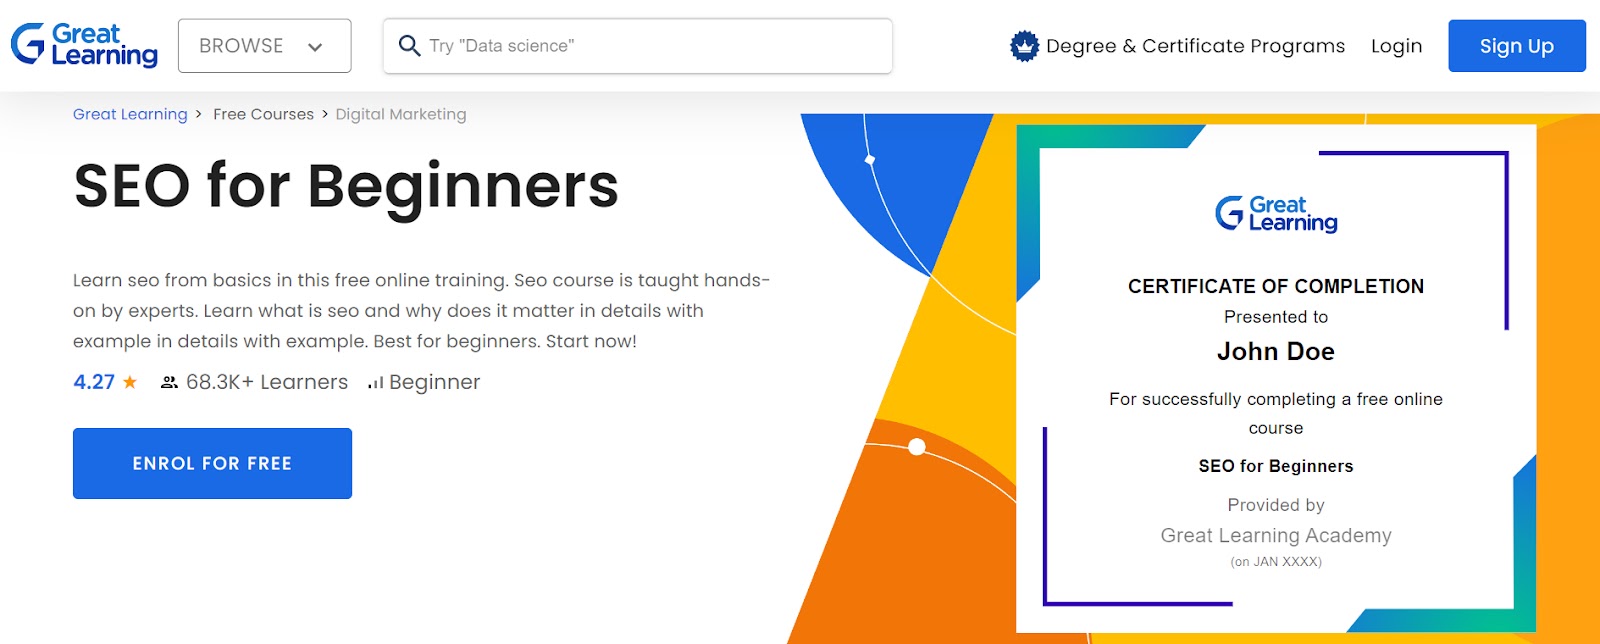 SEO for Beginners landing page